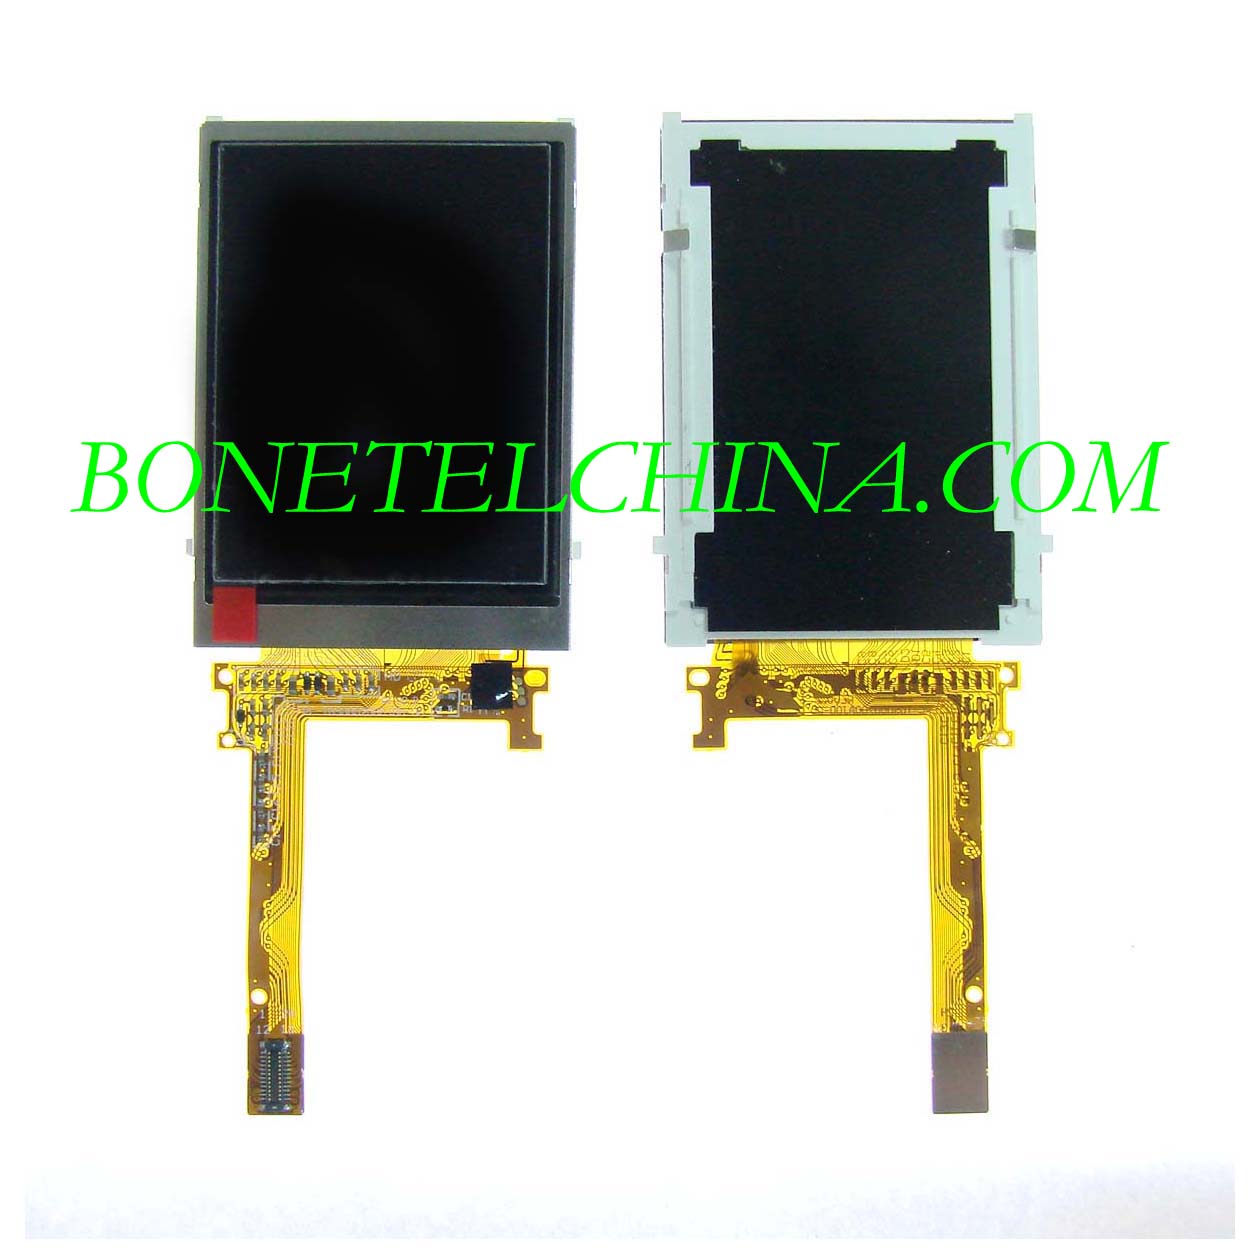 S500/W580 LCD for Sony Ericsson